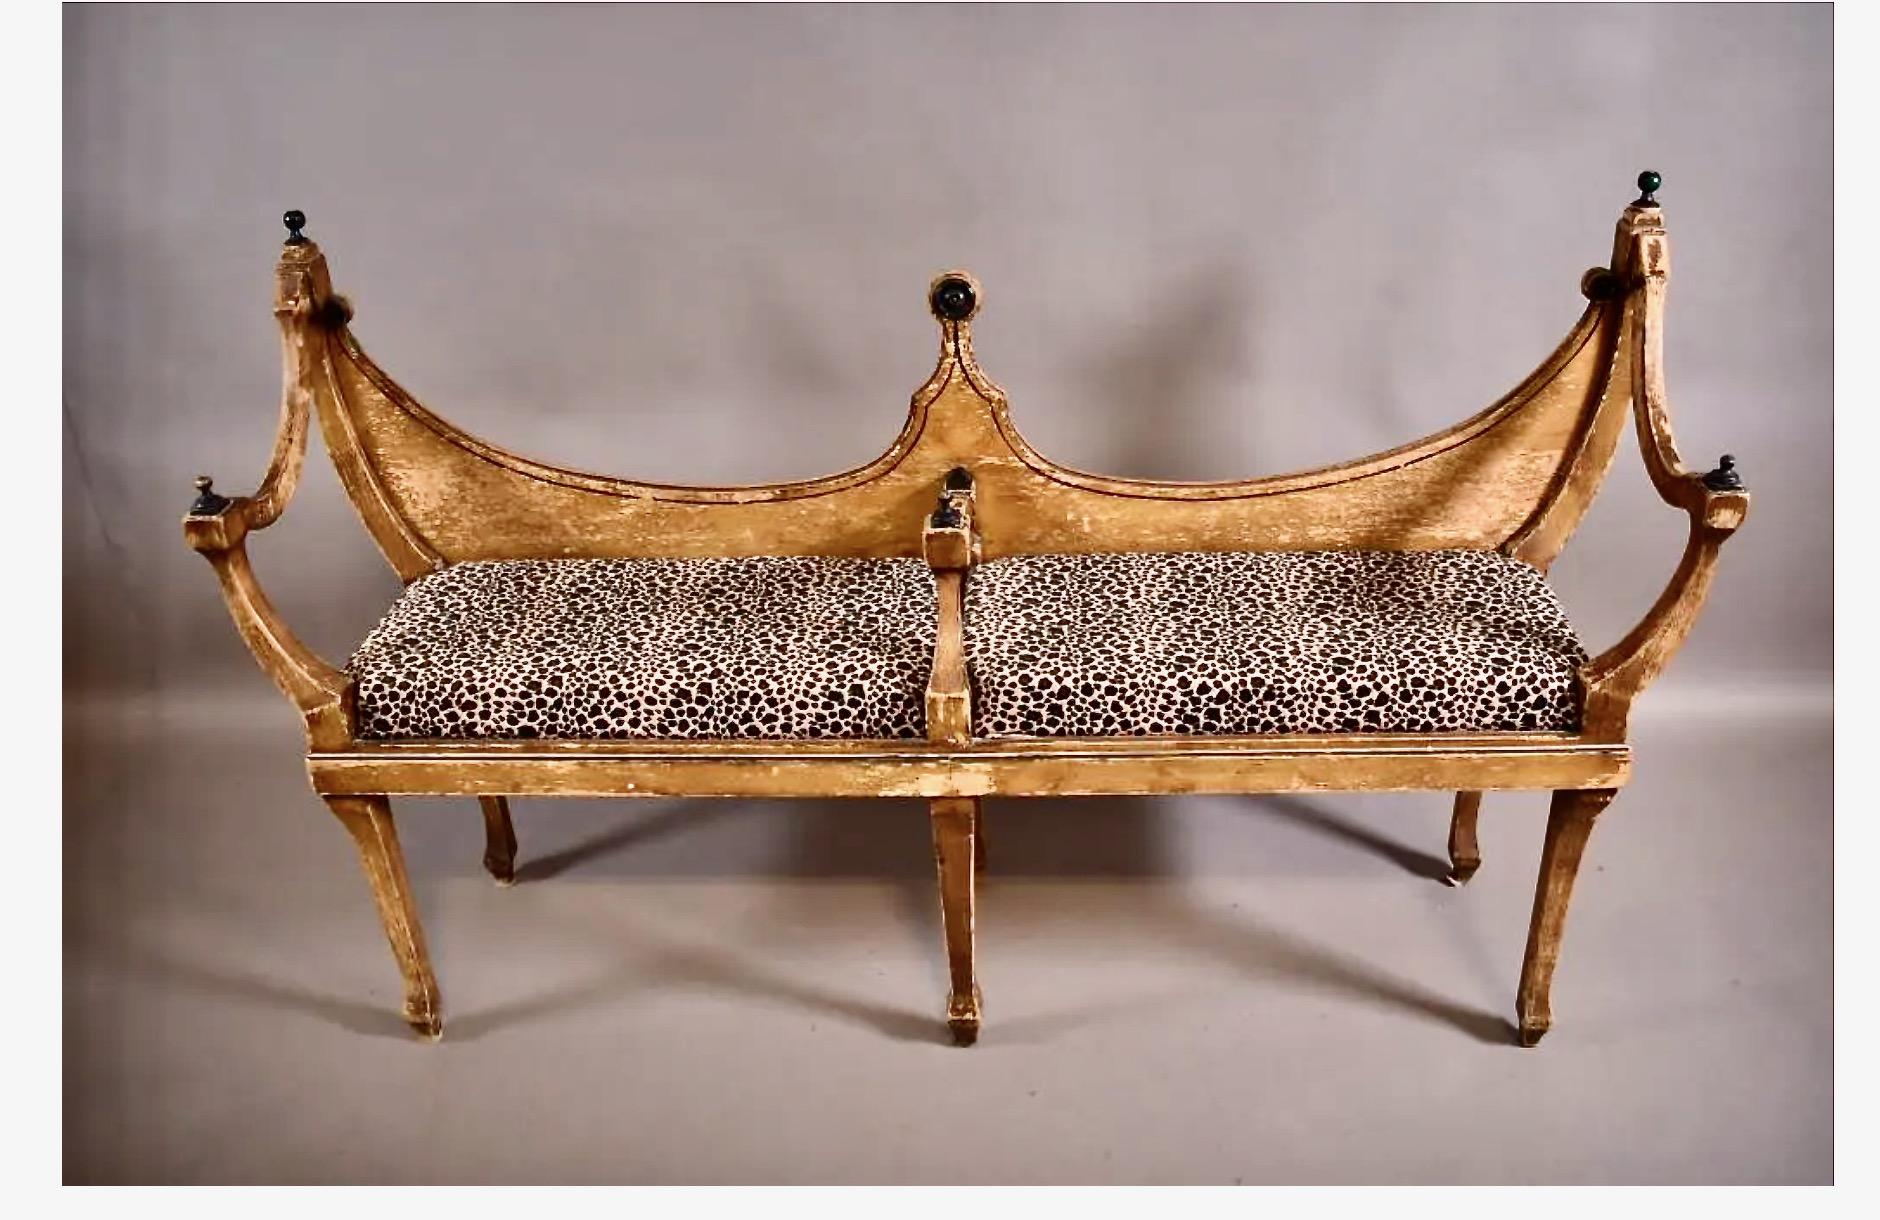 This is an unusual form of neoclassical bench that dates to the early 19th century. The original painted surface has been retained and is richly patinated. The unique bench would had spark to any interior.